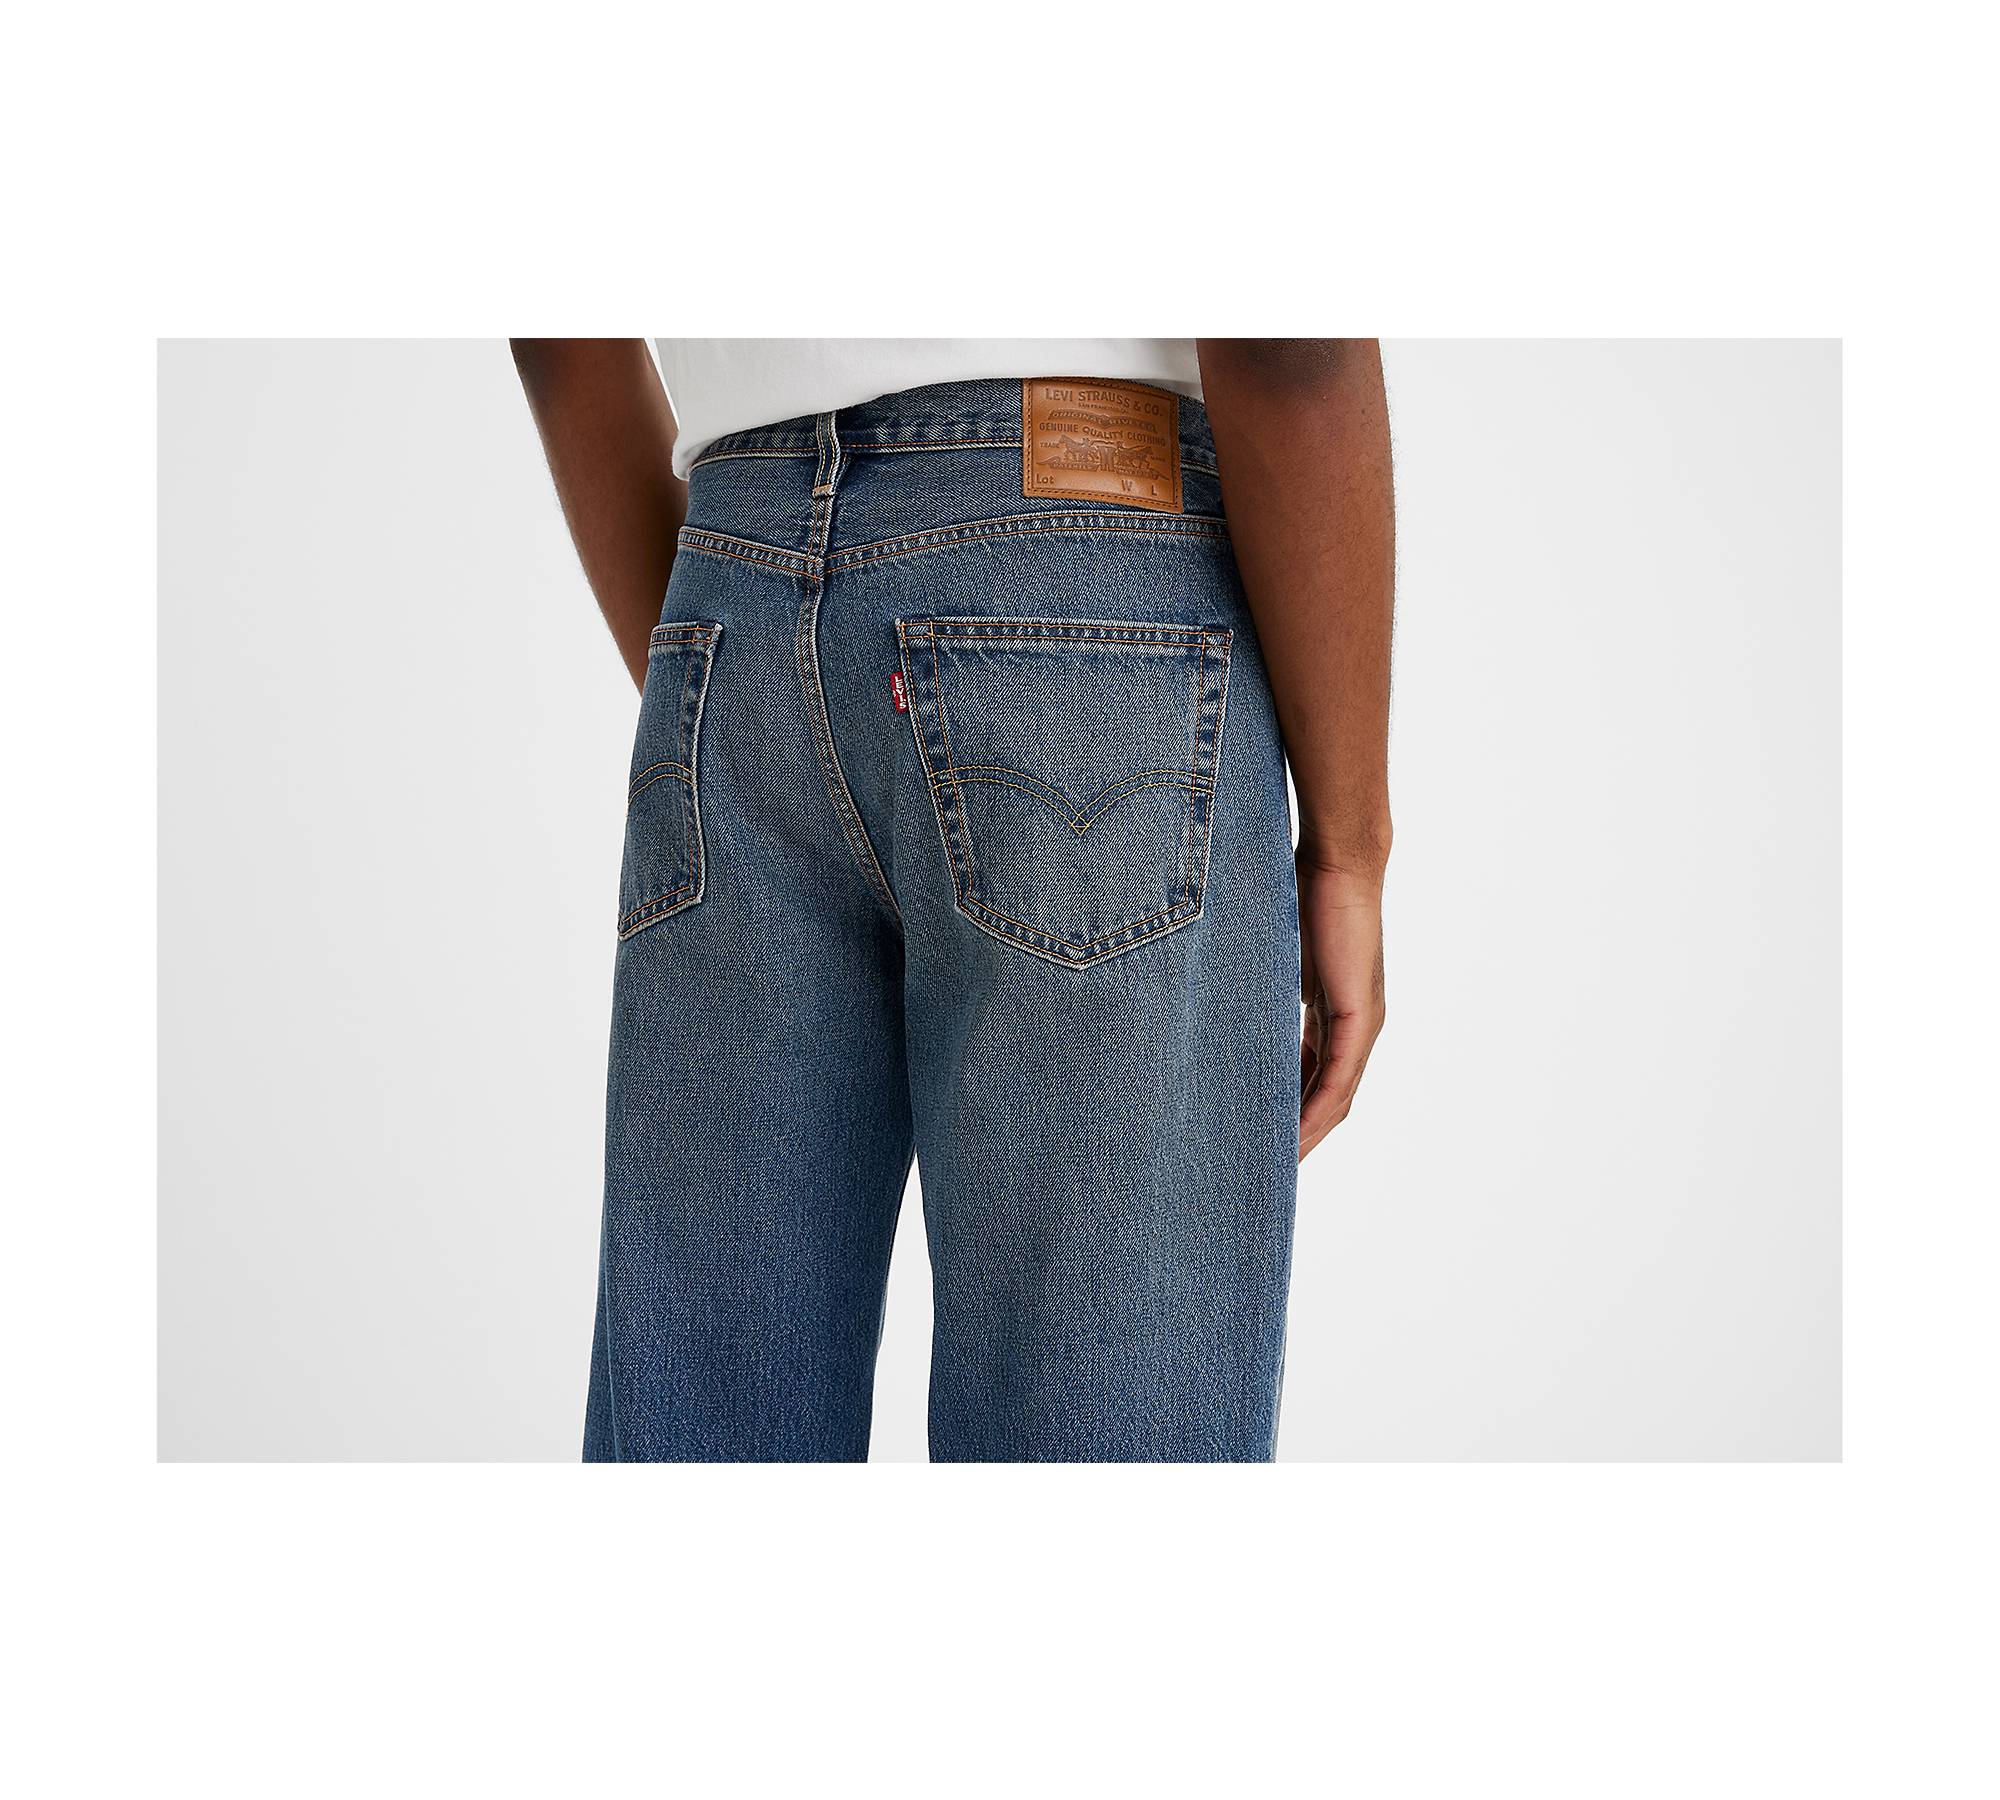 Lucky Brand 100% Cotton Solid Blue Jeans 28 Waist - 69% off